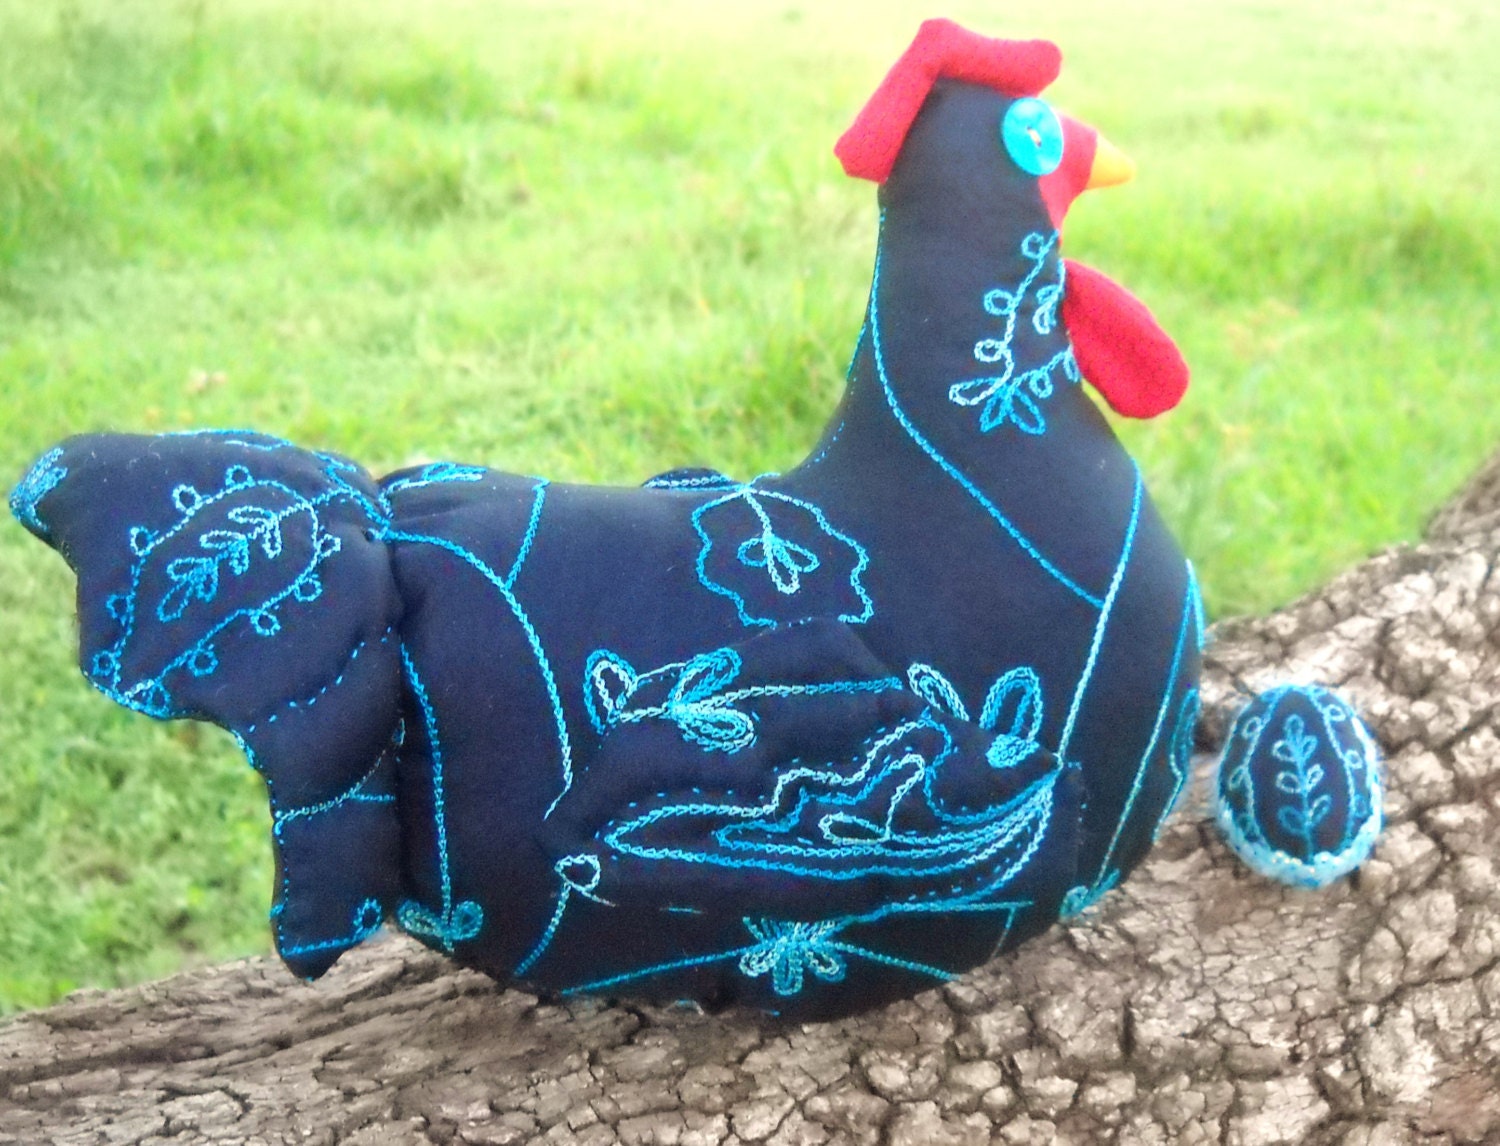 SPRING SALE - Colorful chicken doorstop  - "Ramblin Rita" - embroidered blue silk, quilted wings and tail and fancy blue egg - ChickenJungle